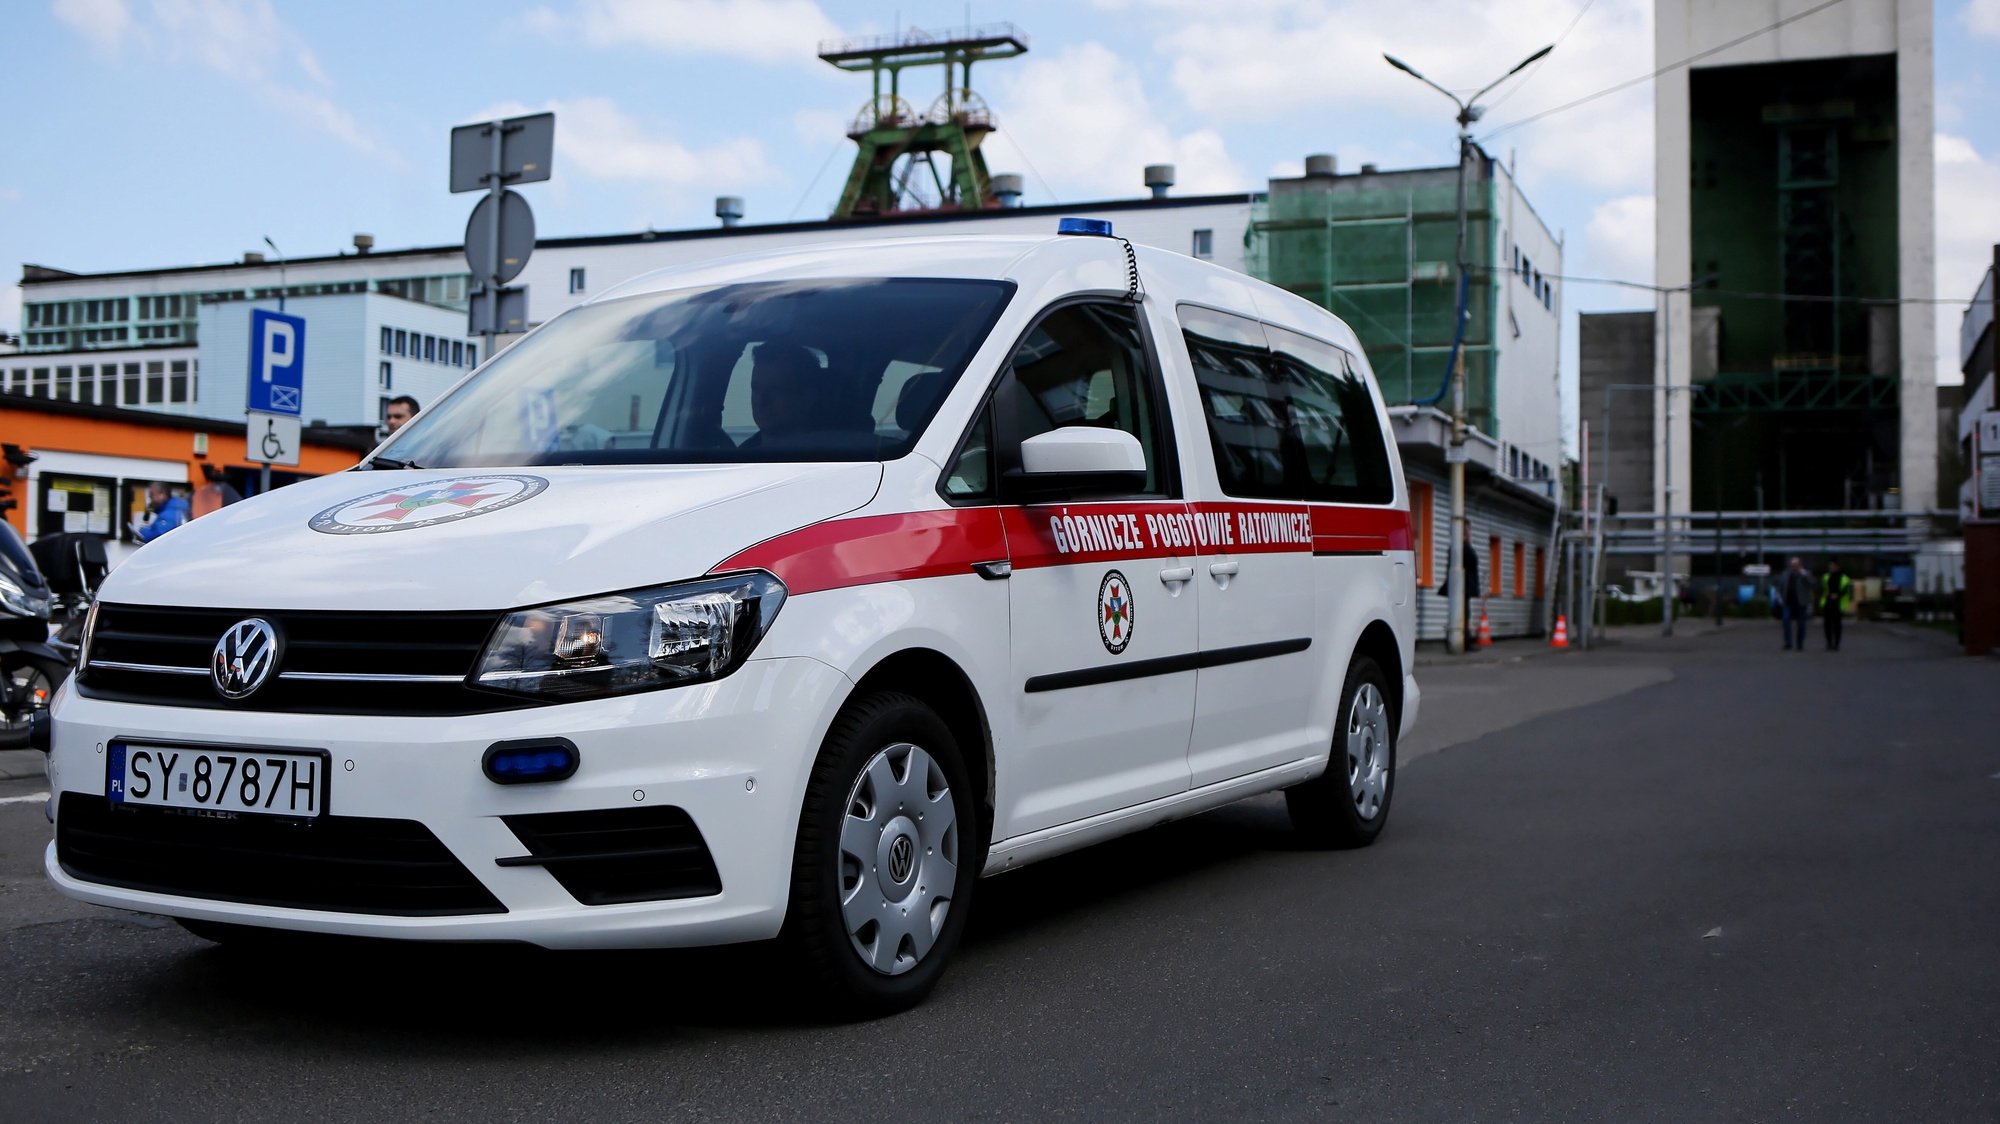 epa09903915 An ambulance in front of the Zofiowka coal mine in Jastrzebie-Zdroj, southern Poland, 23 April 2022. A tremor shook the Zofiowka coal mine in the early hours on 23 April, leaving ten miners missing, according to a statement by the mining conglomerate JSW, the mine owner. The tremor involved &#039;an intensive outflow of methane&#039;, JSW said. Twelve rescue teams have been trying to reach the missing miners. High concentration of methane may hinder the rescue operation as the pipeline supplying fresh air to the location has been damaged. A rescue operation is currently underway.  EPA/Zbigniew Meissner POLAND OUT